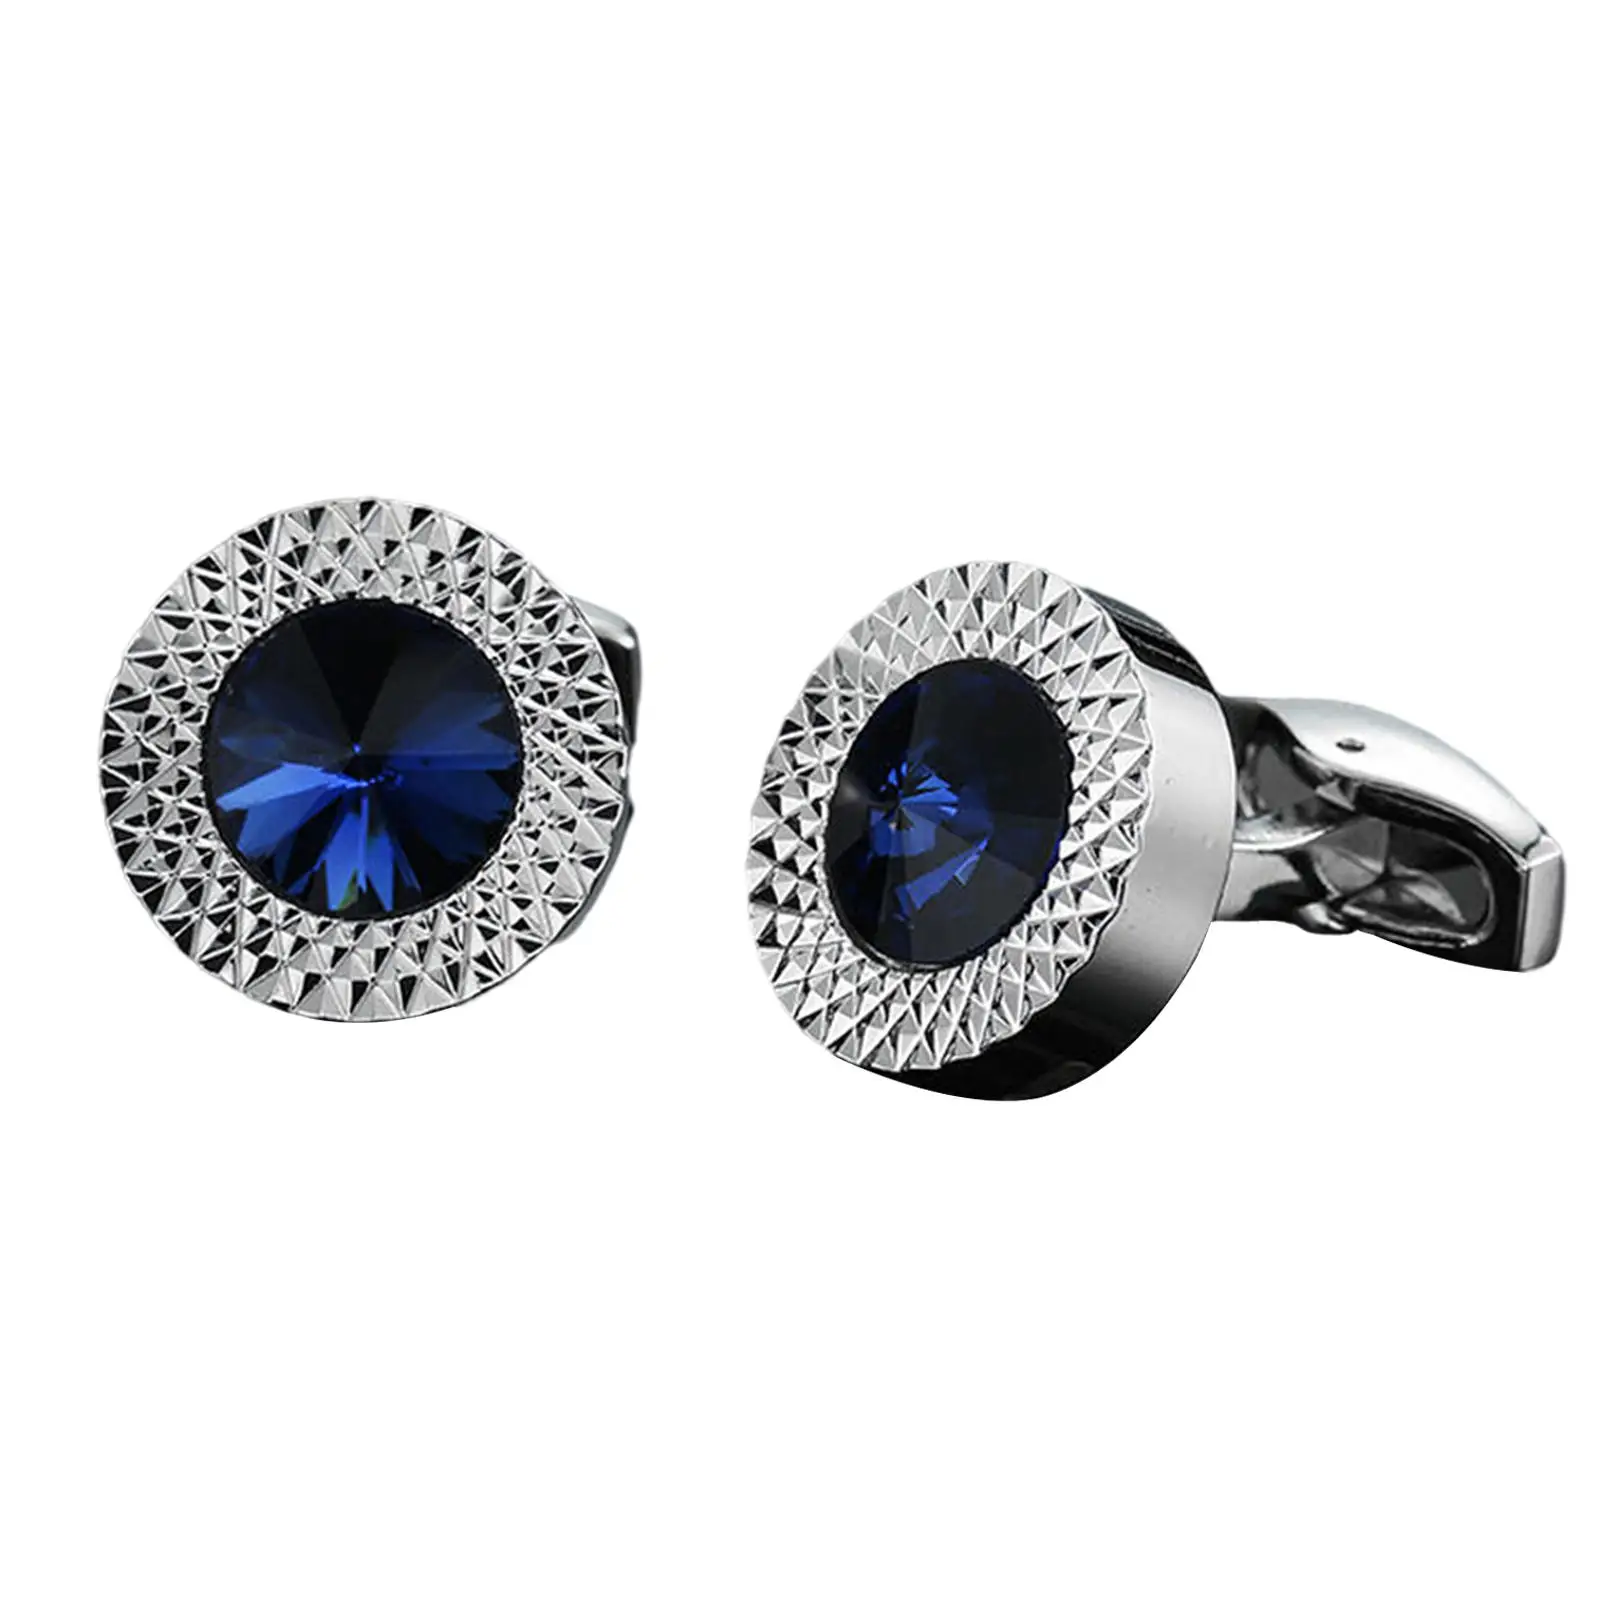 1 Pair Classy Stylish Shirt Cuff Links Business Crystal Fashion Decor Studs Suit French Accessories Simply Shirt for Party Gift